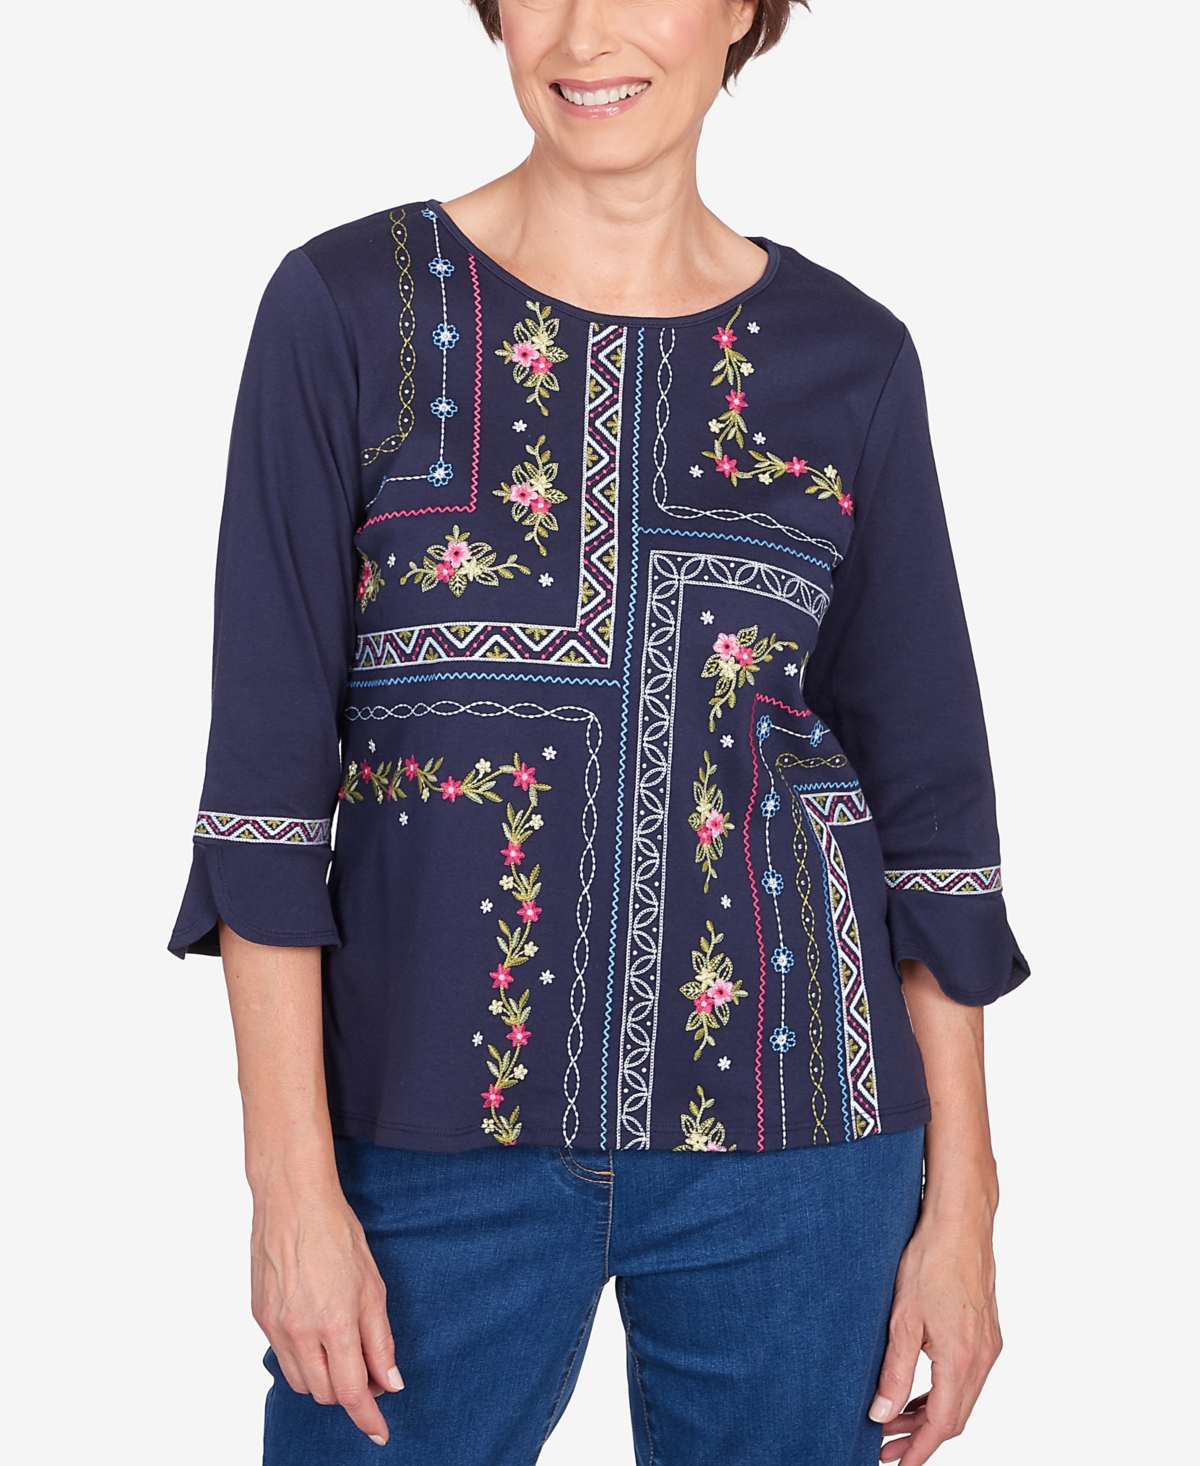 Petite in Full Bloom Flower Embroidery Quad Top - Navy